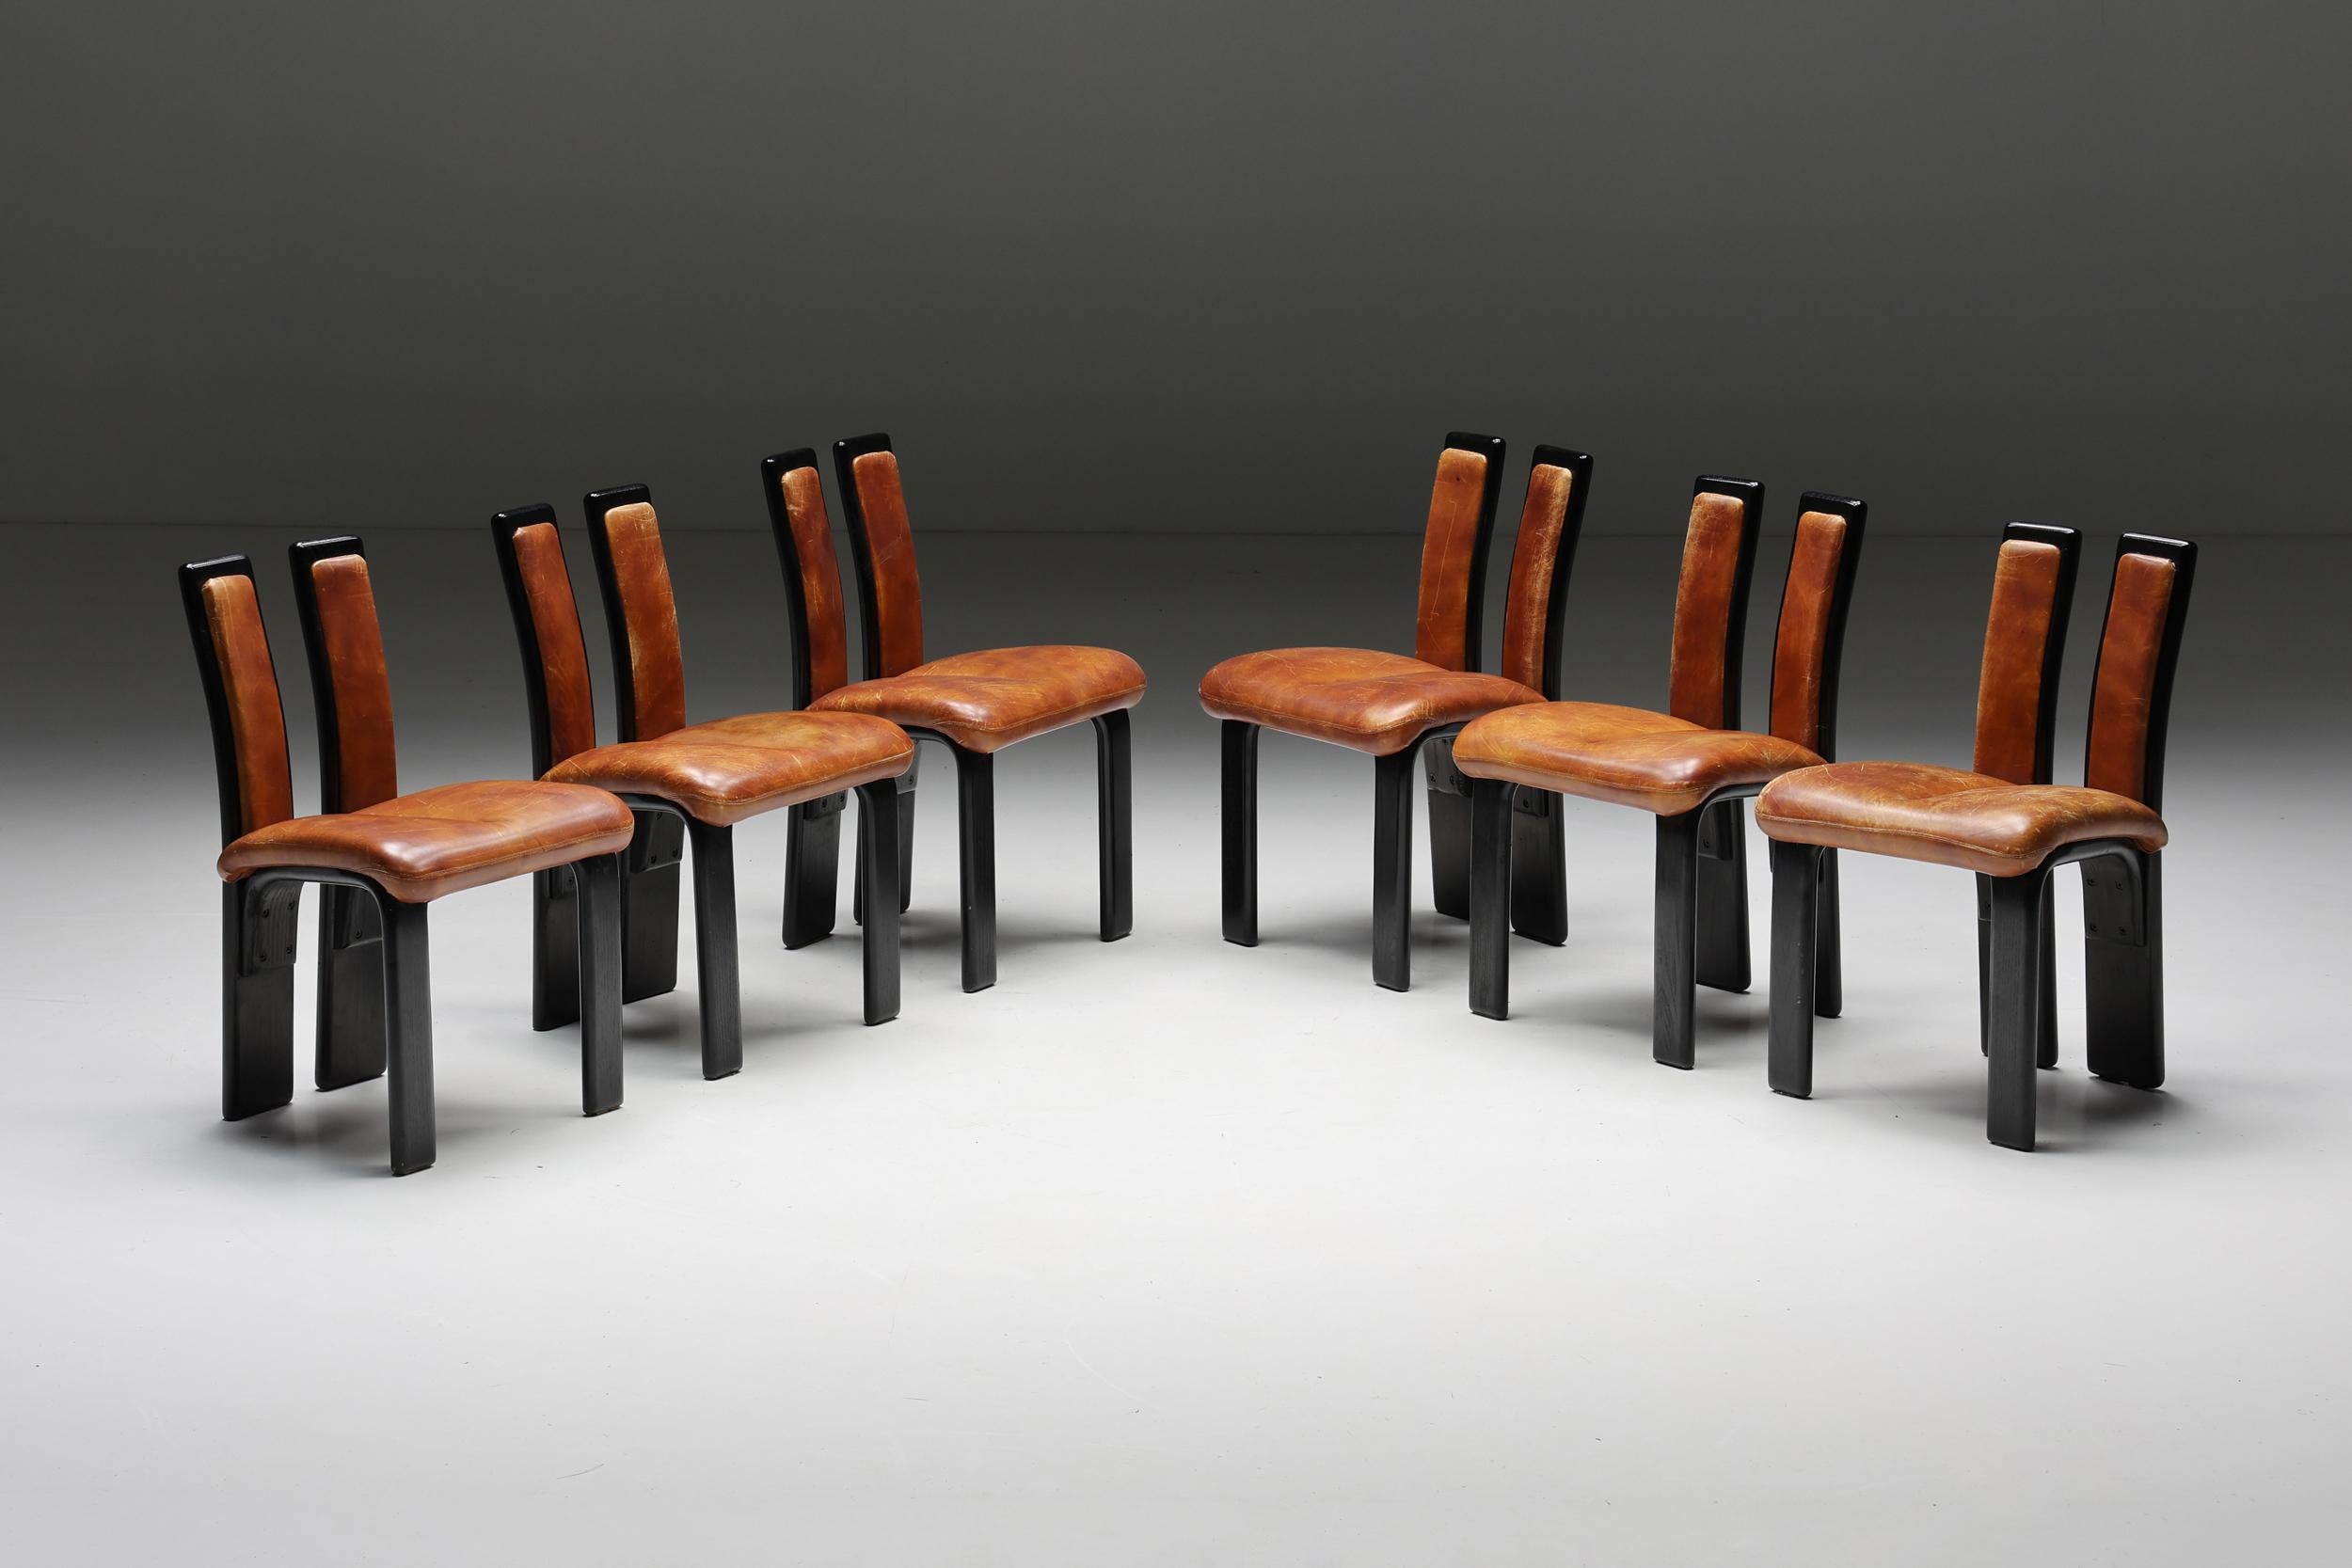 Italian; Cognac; leather; dining chairs; 1980s; Italian Design; Postmodern; Mid-Century Modern; Scarpa; Afra & Tobia Scarpa; Italy; 

Italian cognac leather dining chairs from the 1980s. Dining chairs with a remarkable back which is divided into